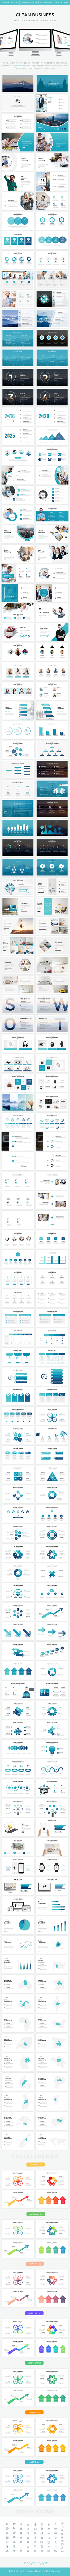 Clean Business  Powerpoint Template 2018